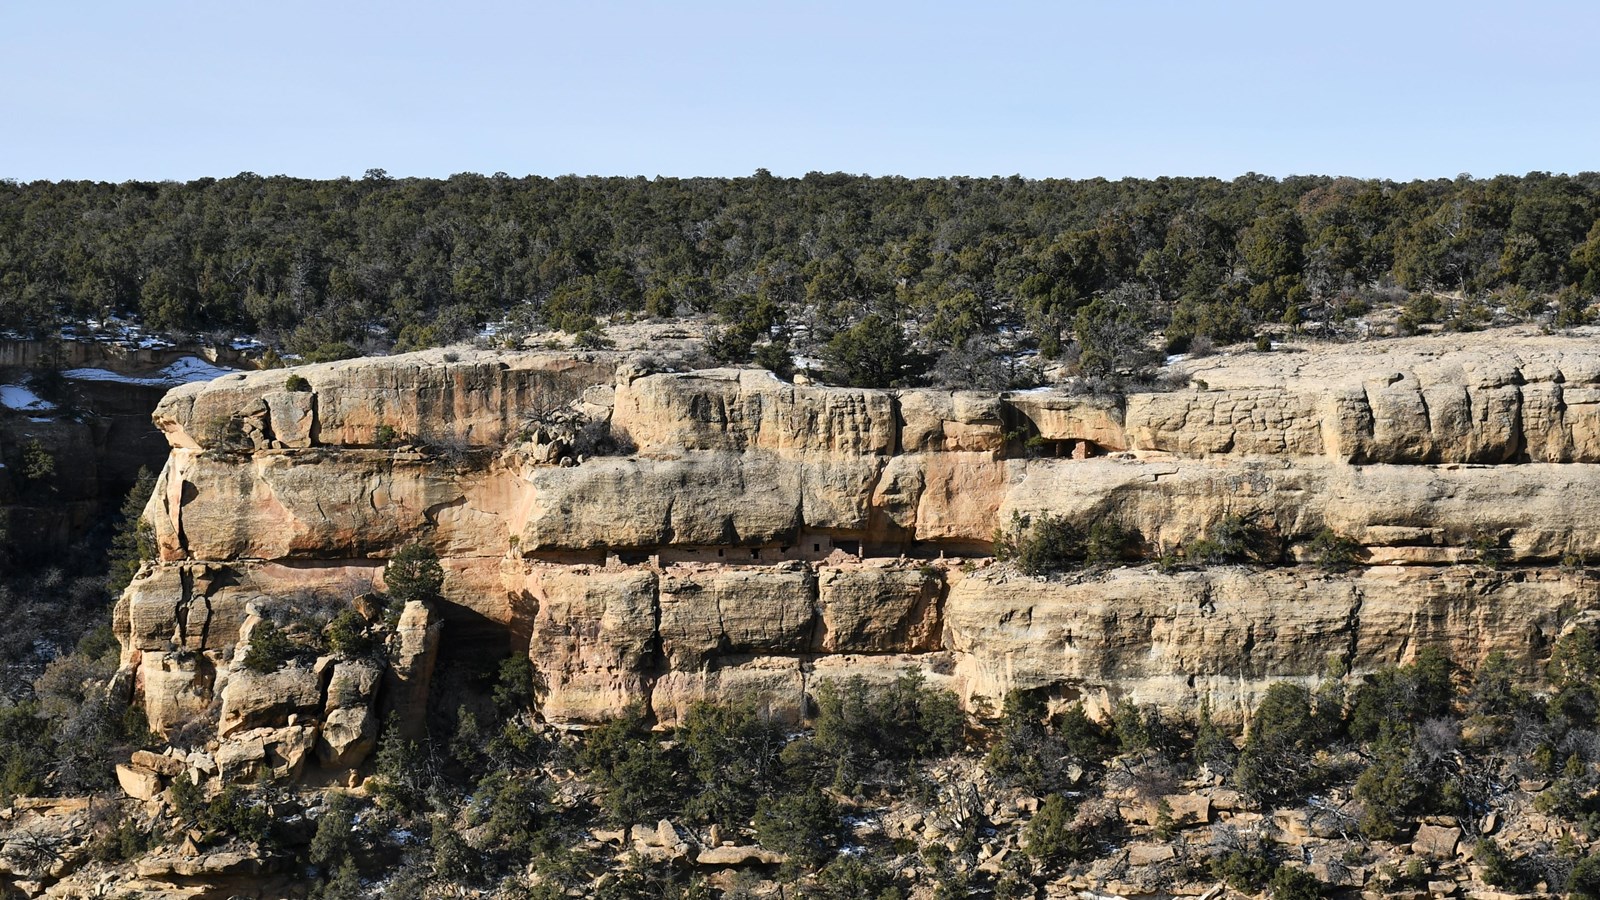 A cliff dwelling sits in a small sandstone alcove. Pinyon pines and junipers cover the mesa top.